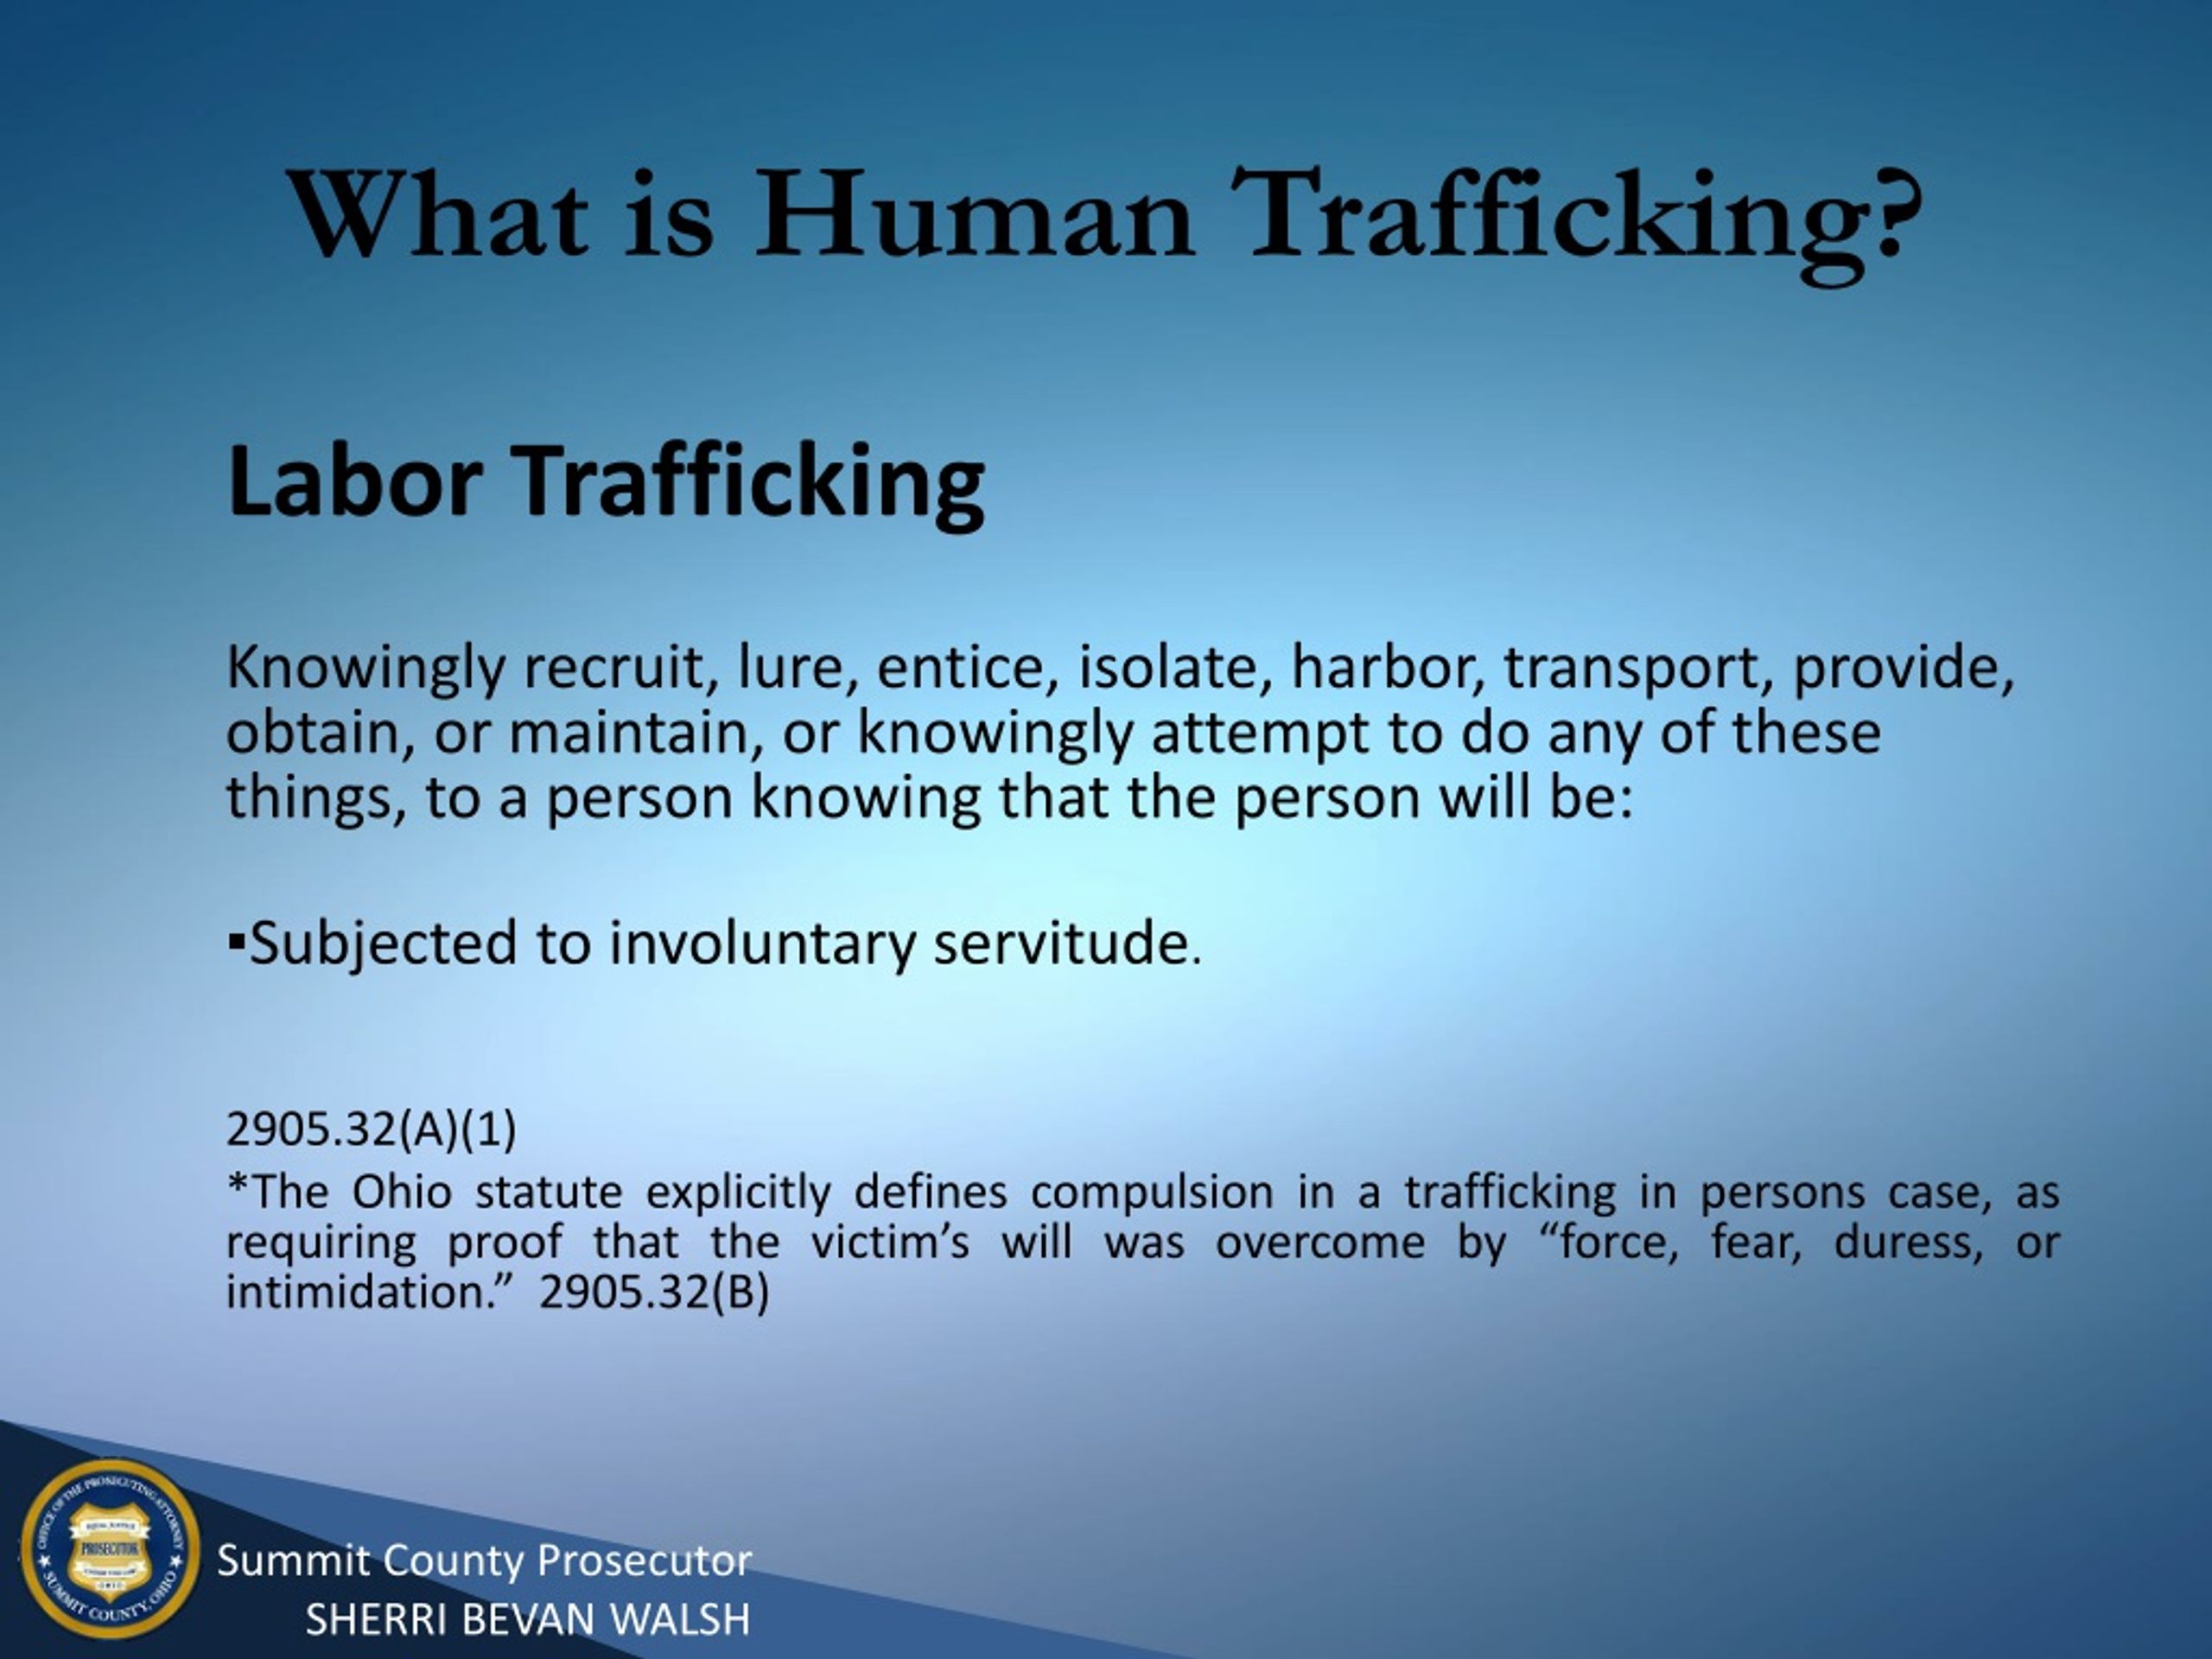 Ppt Human Trafficking Powerpoint Presentation Free Download Id9085086 8875